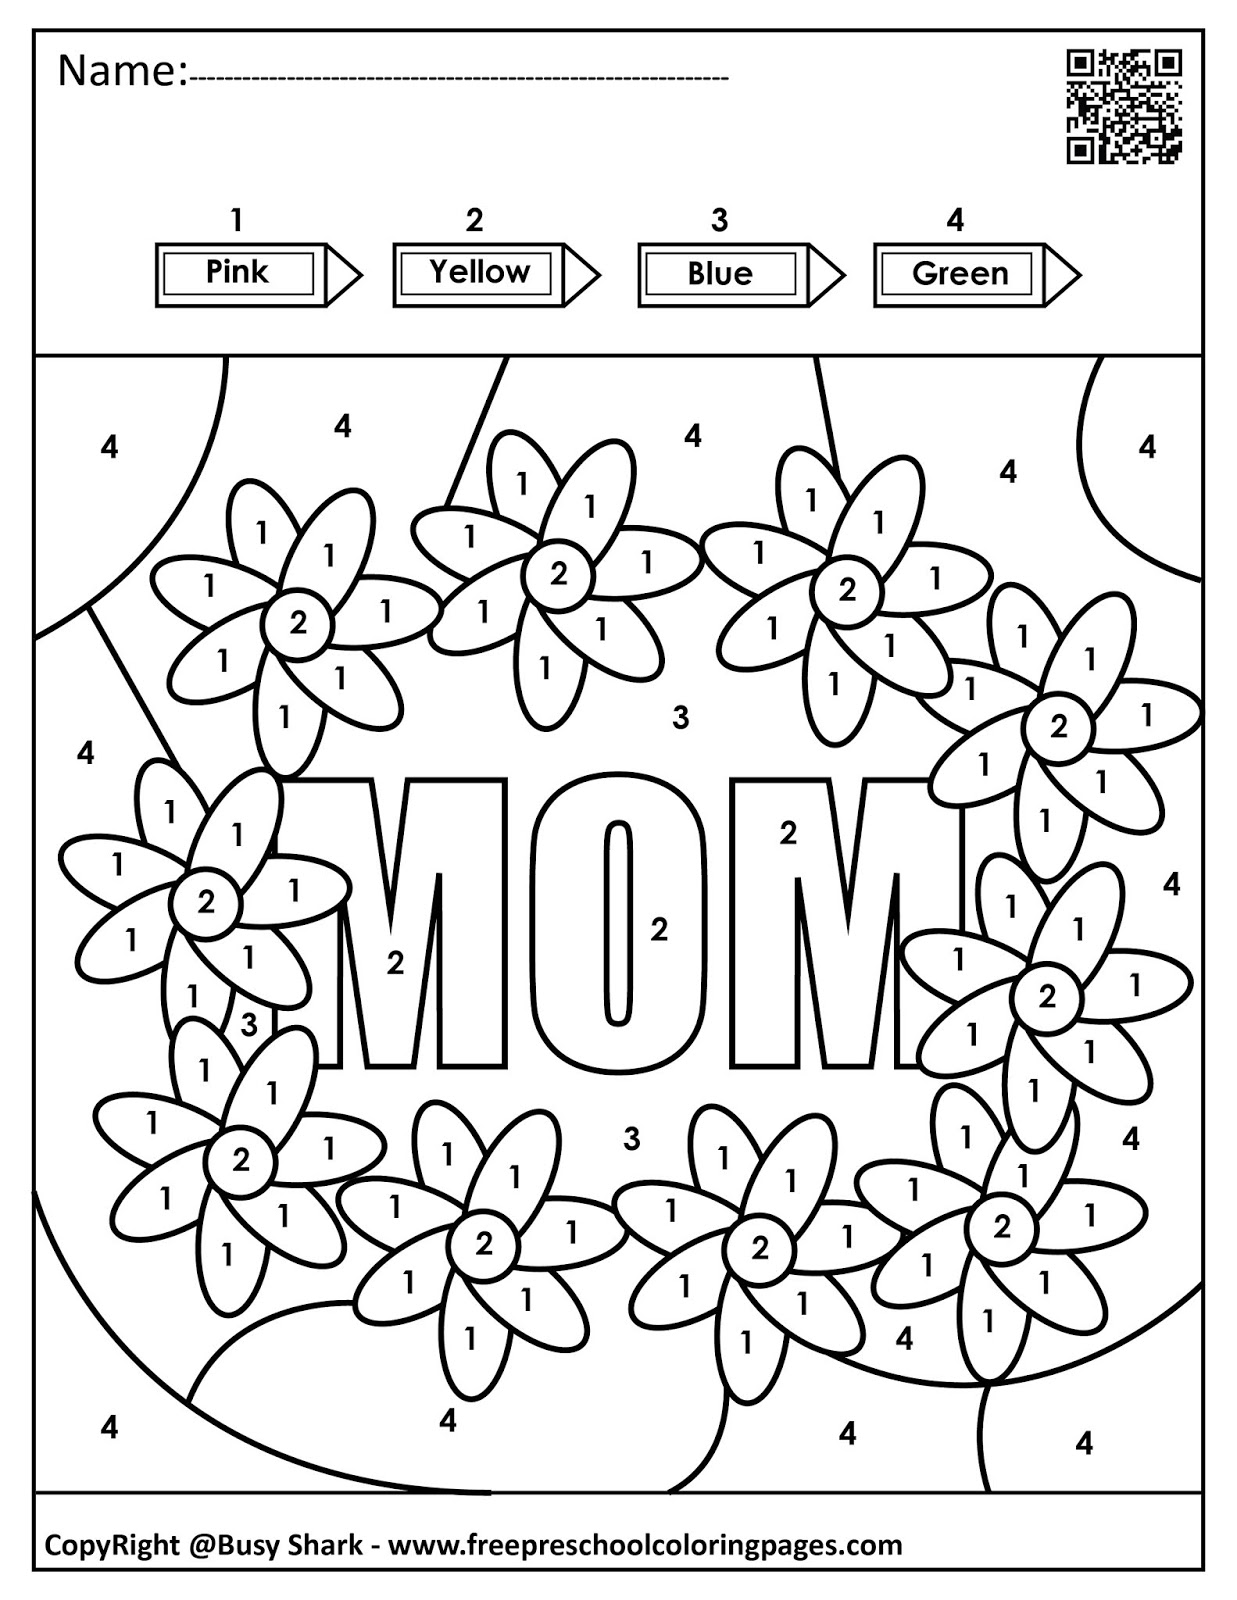 Mother's Day Dot Markers Coloring Book Graphic by Design_store